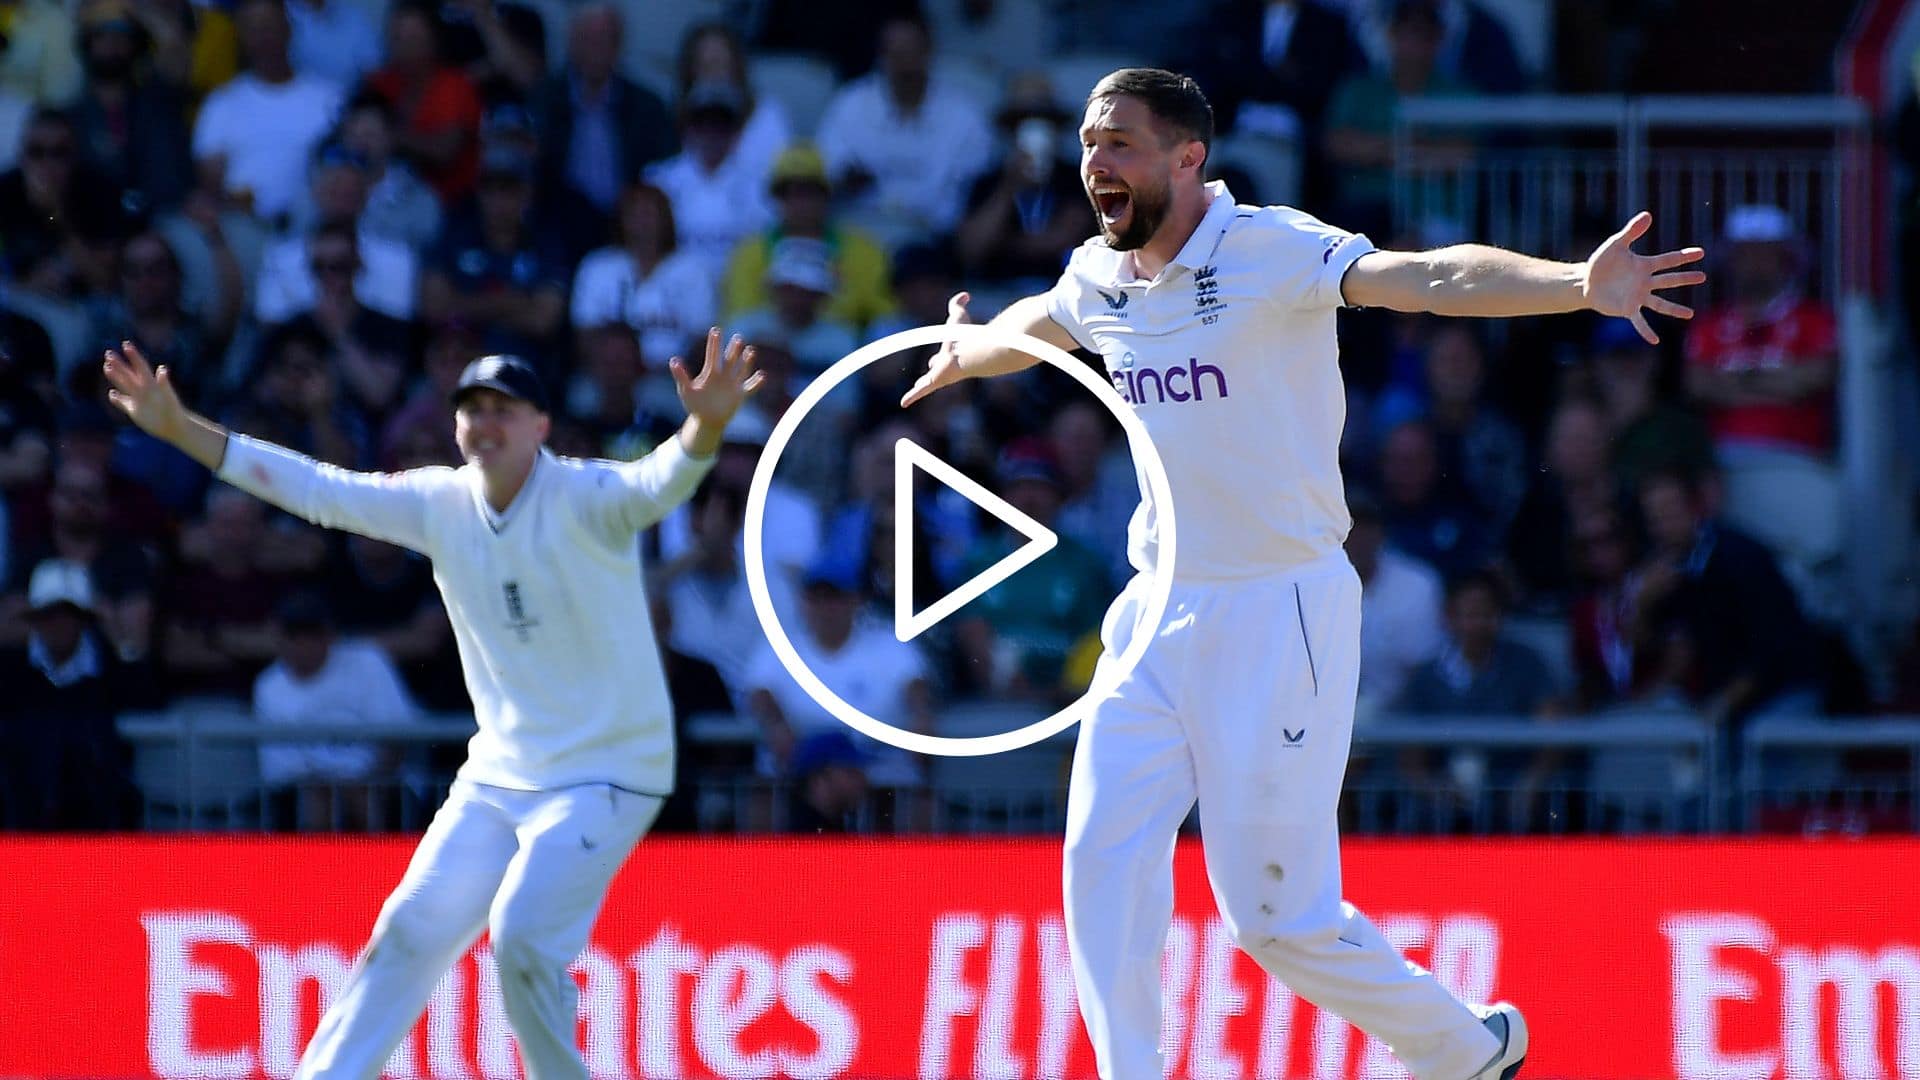 [Watch] Social Media Explodes After Chris Woakes Registers His First Ashes Fifer